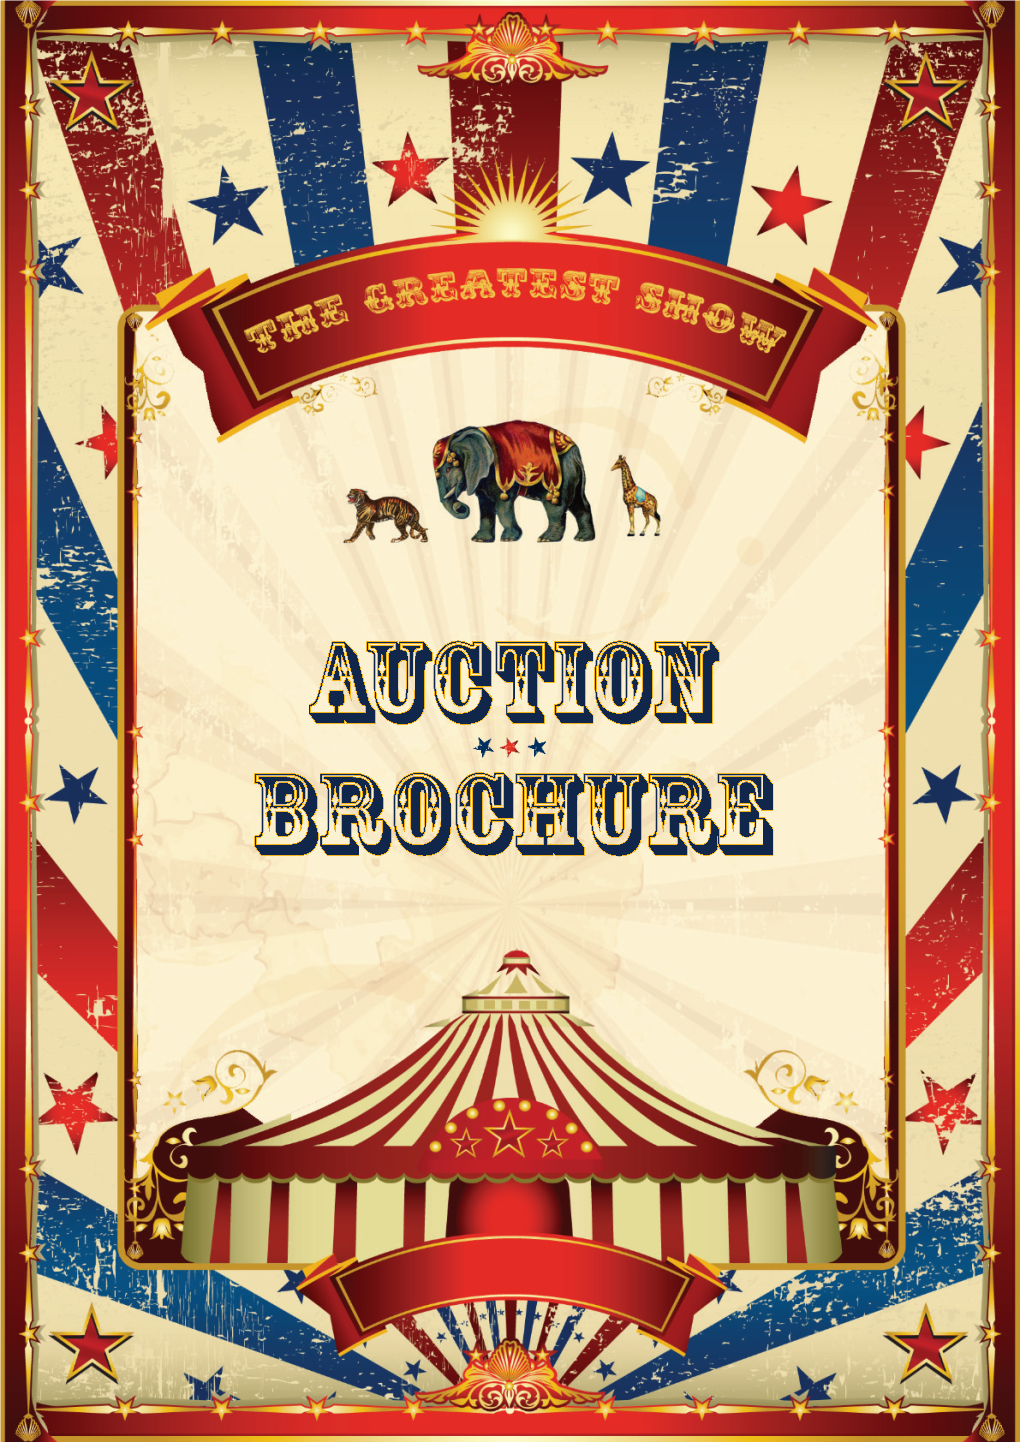 Auction Brochure Welcome!